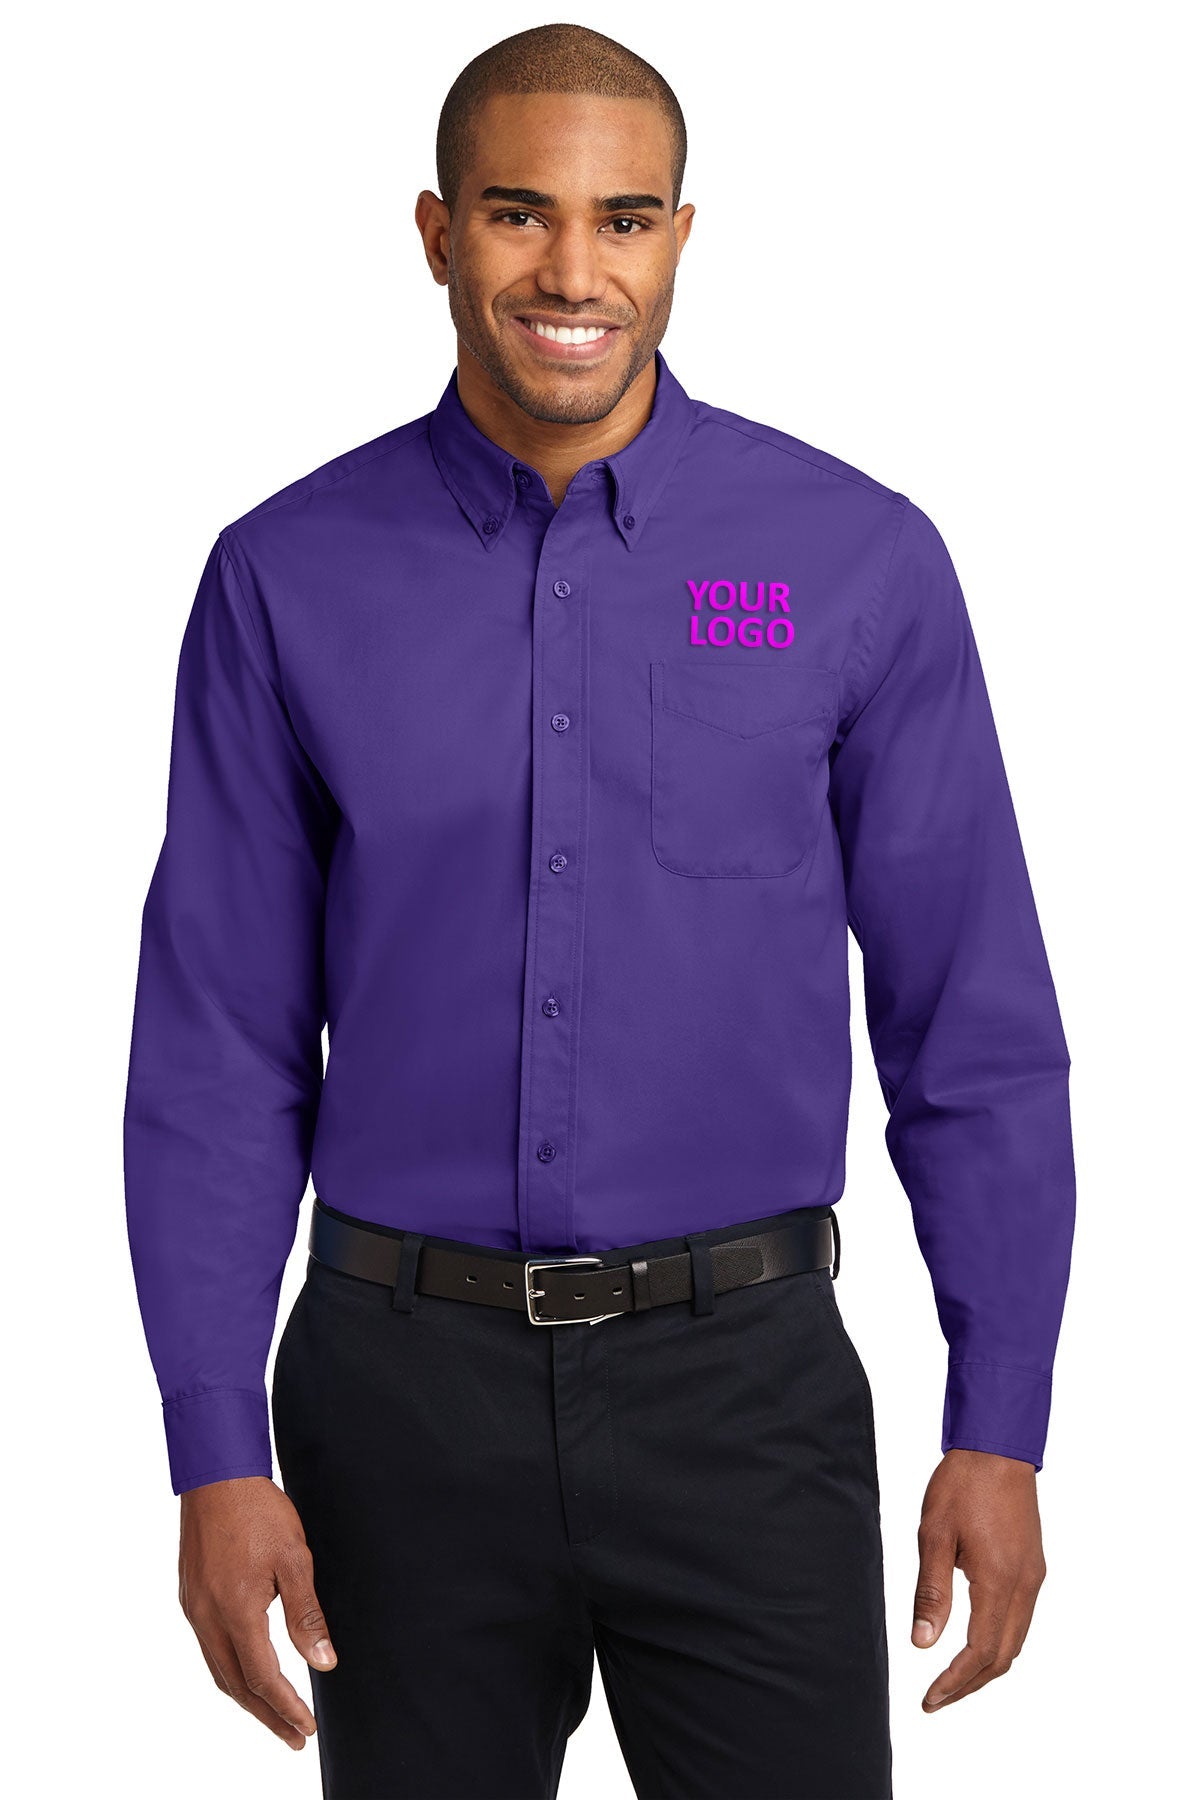 Port Authority Purple TLS608 embroidered work shirts